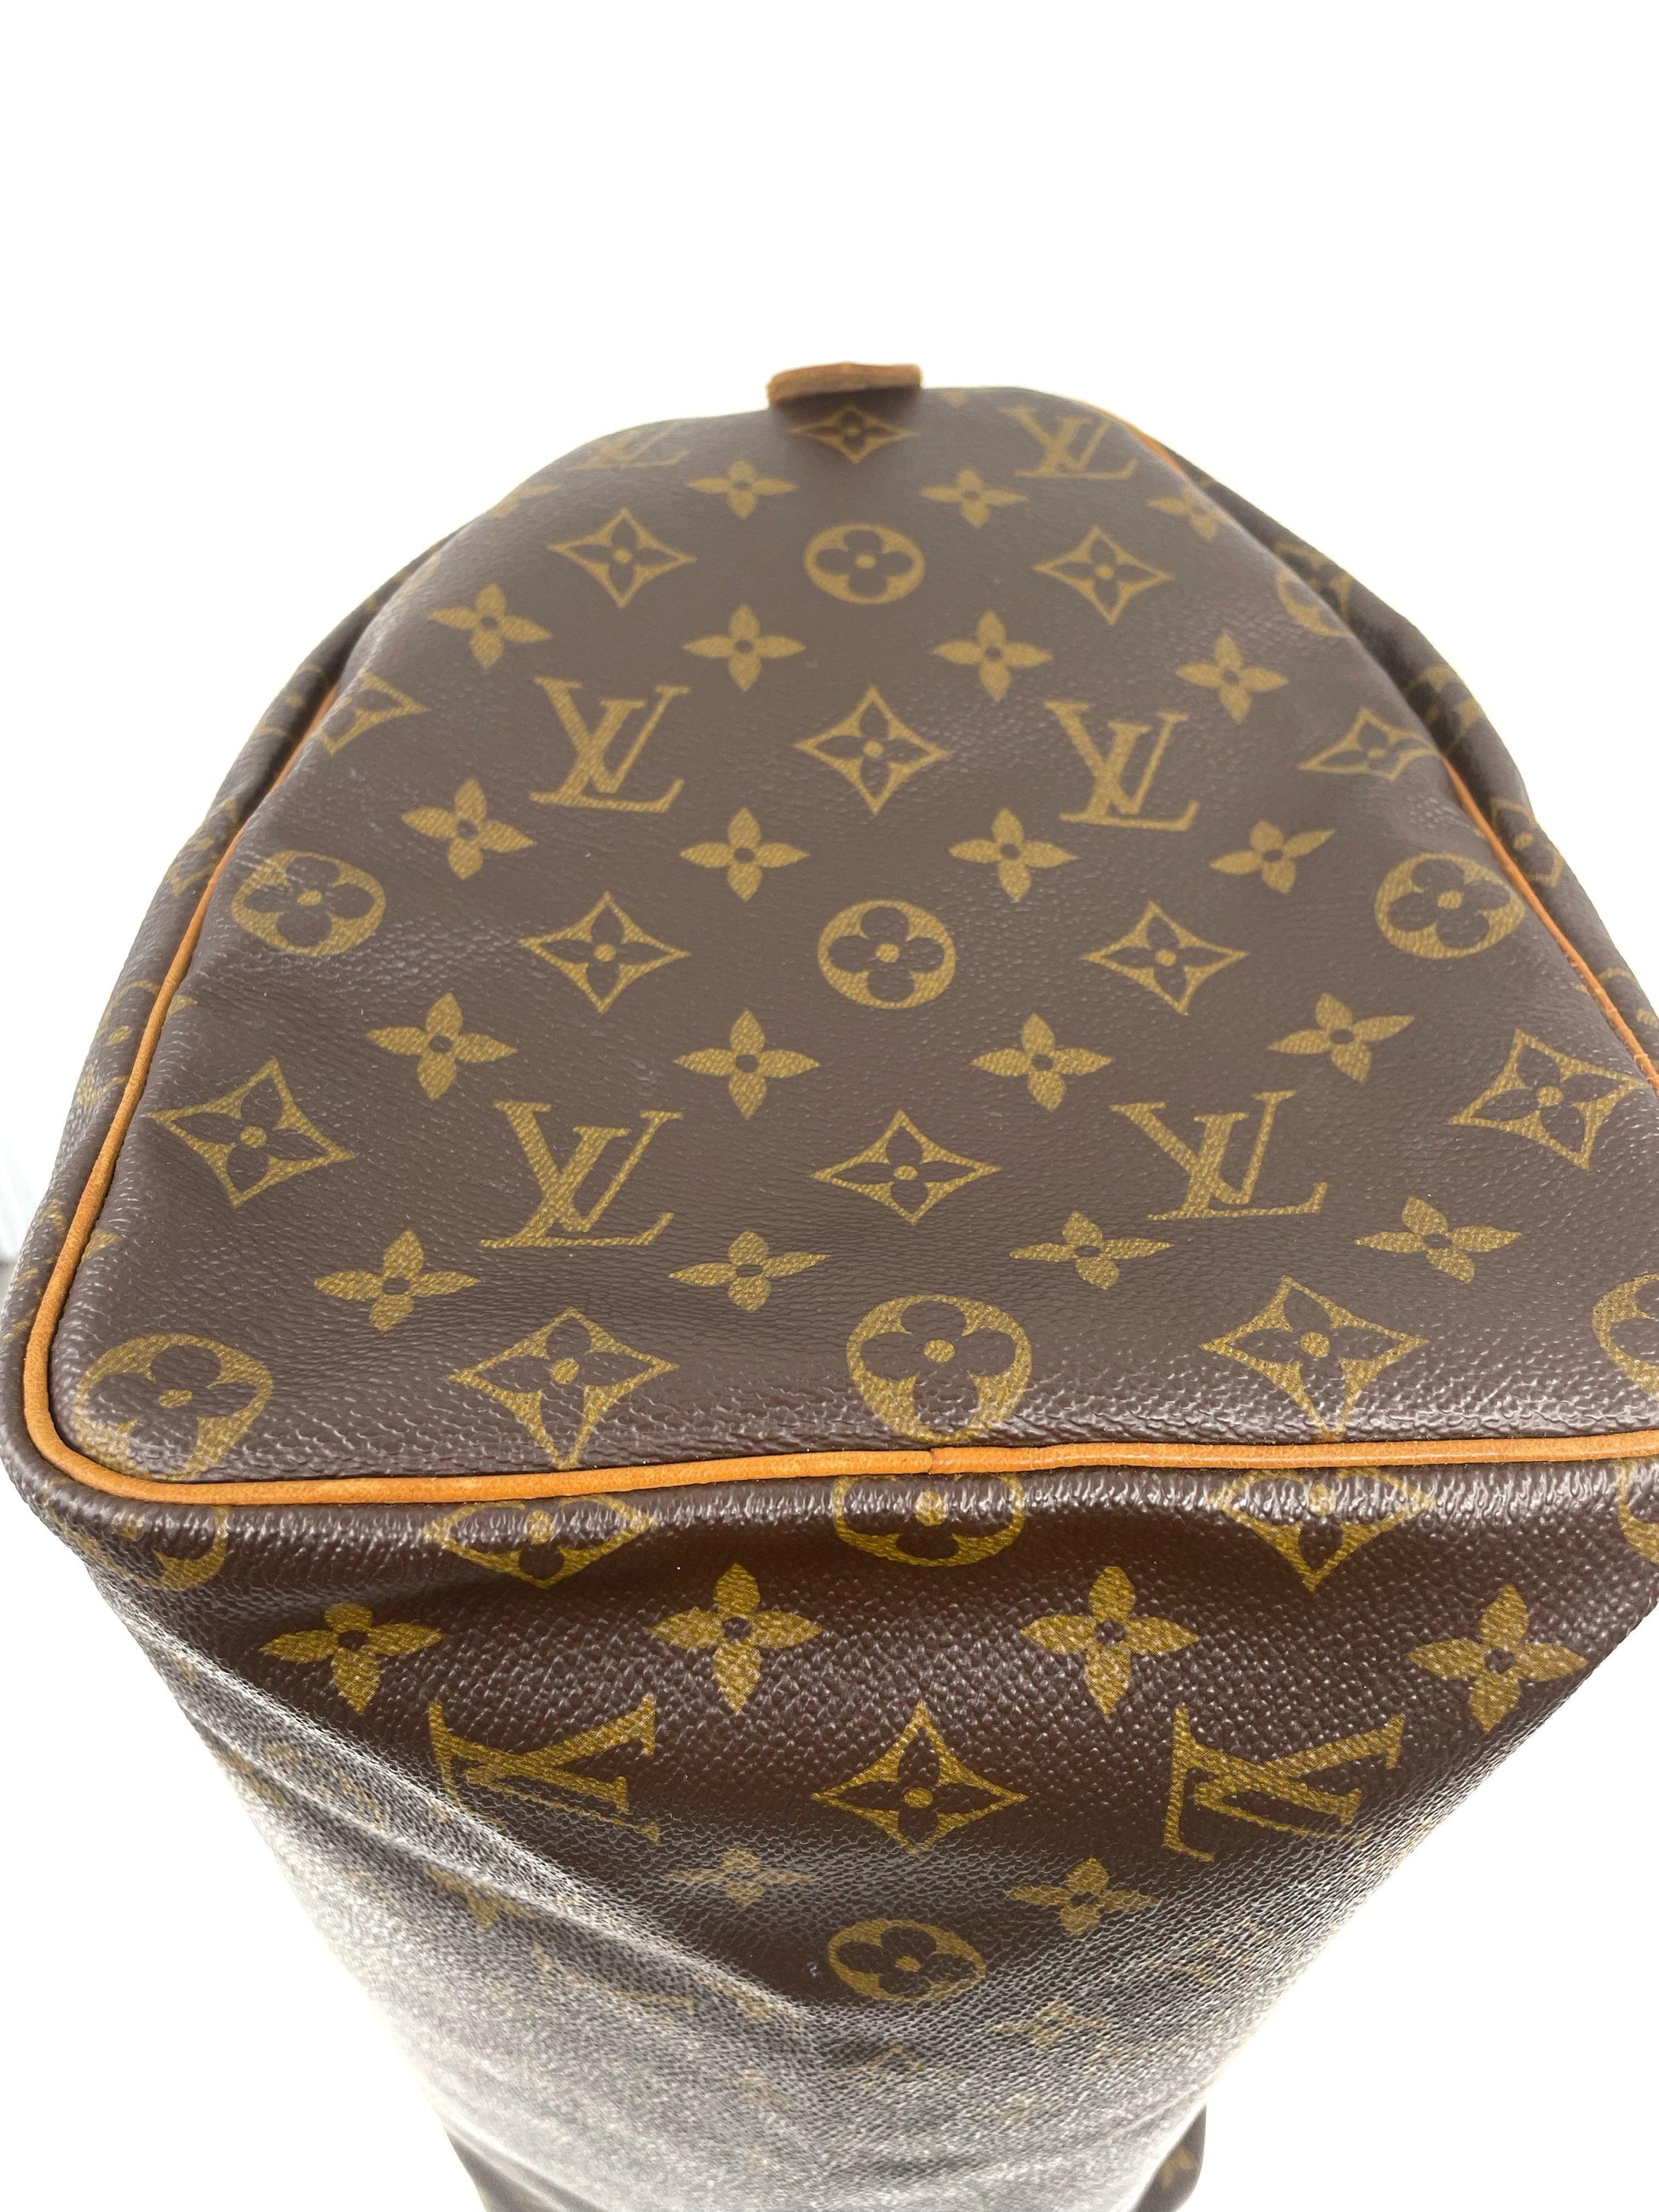 The Louis Vuitton Speedy 40. Classic, large and never out of style